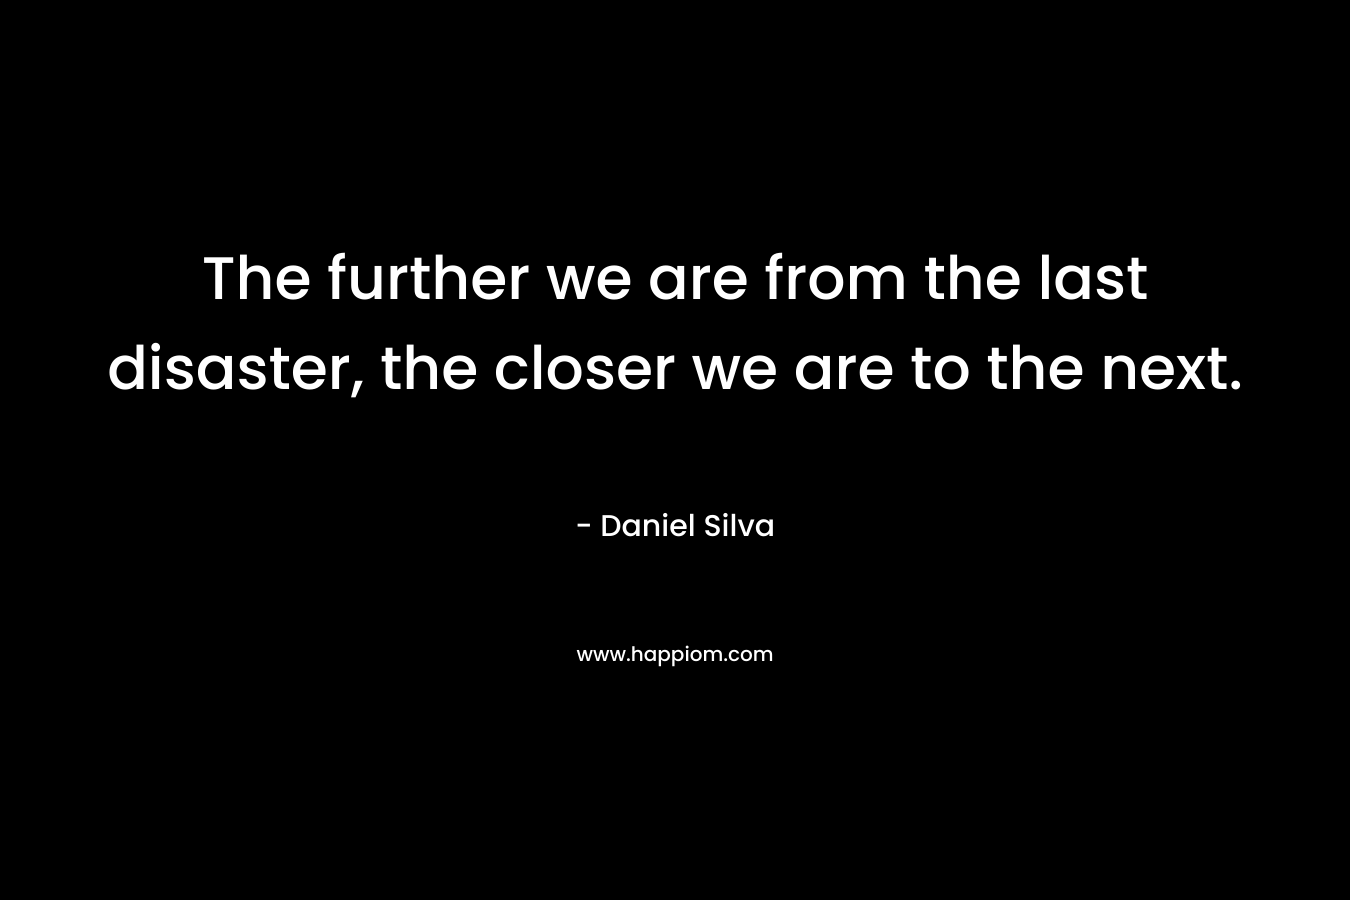 The further we are from the last disaster, the closer we are to the next. – Daniel Silva